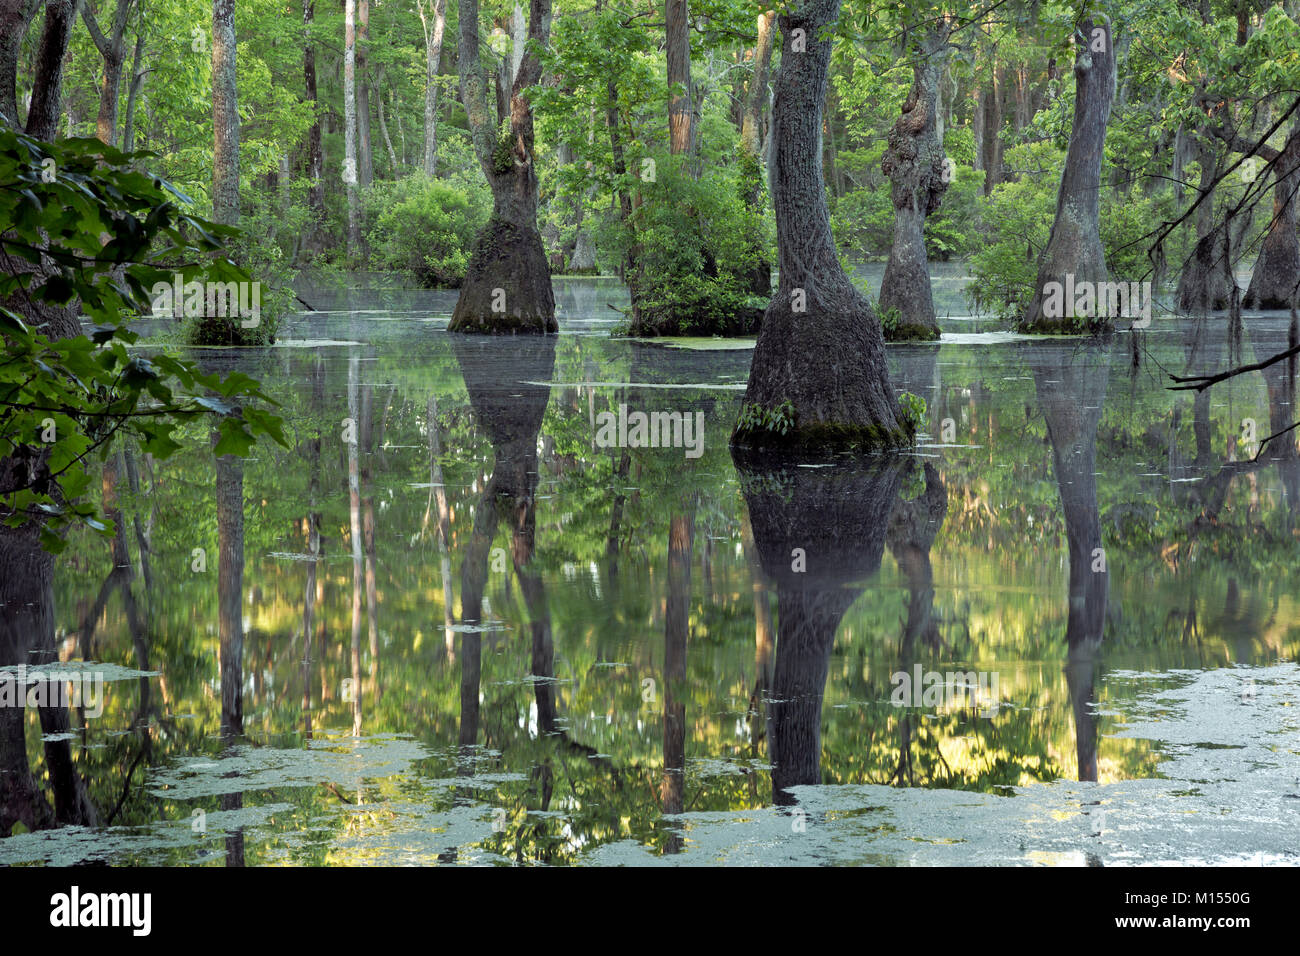 NC01486-00...NORTH CAROLINA - Bald cypress and tupalo gum trees surrounded by a floating mat of duckweed in Merchant Millpond; at Merchant Millpond St Stock Photo